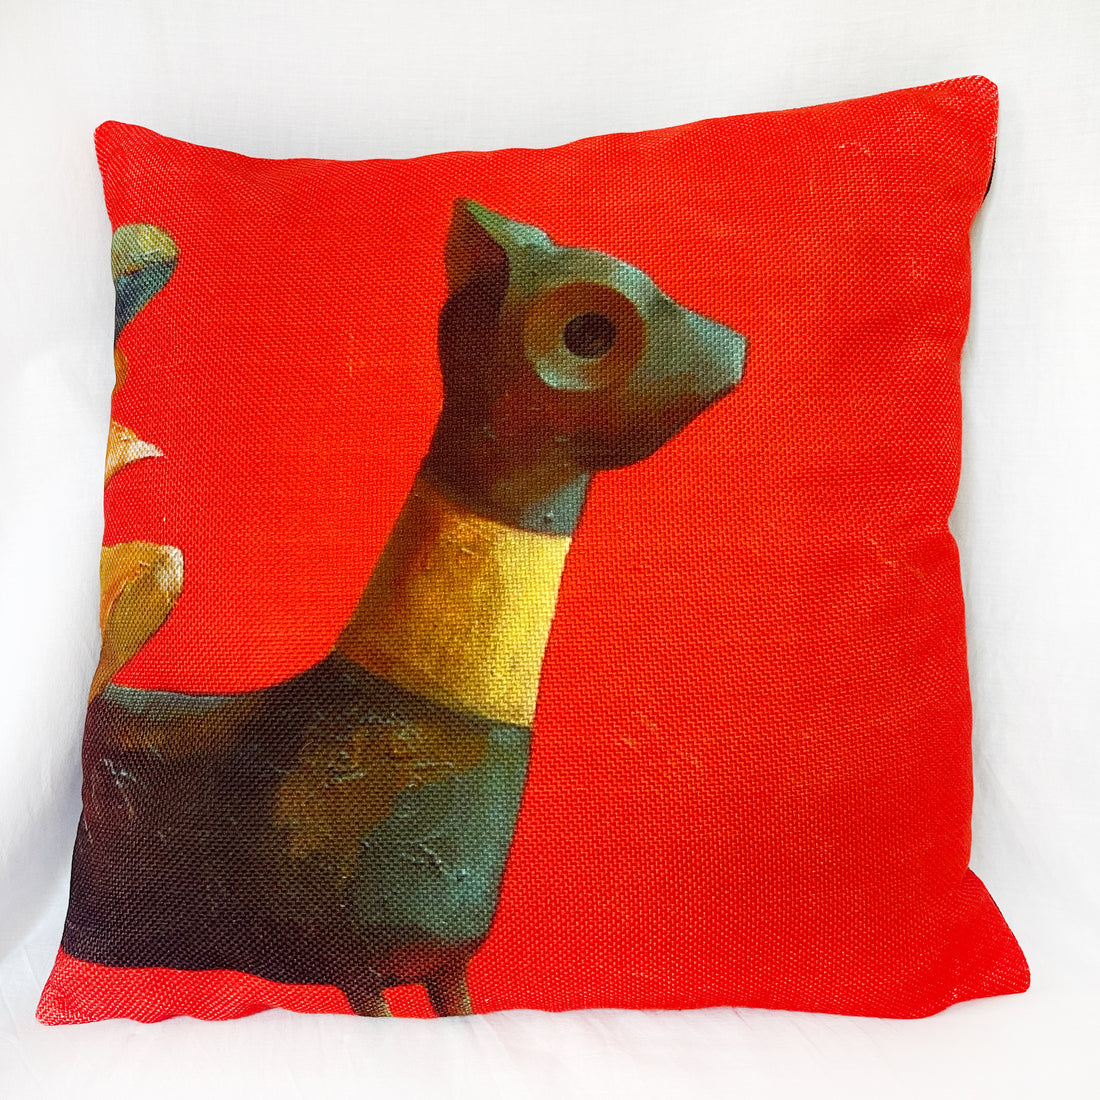 The red cat pillow (1/2)